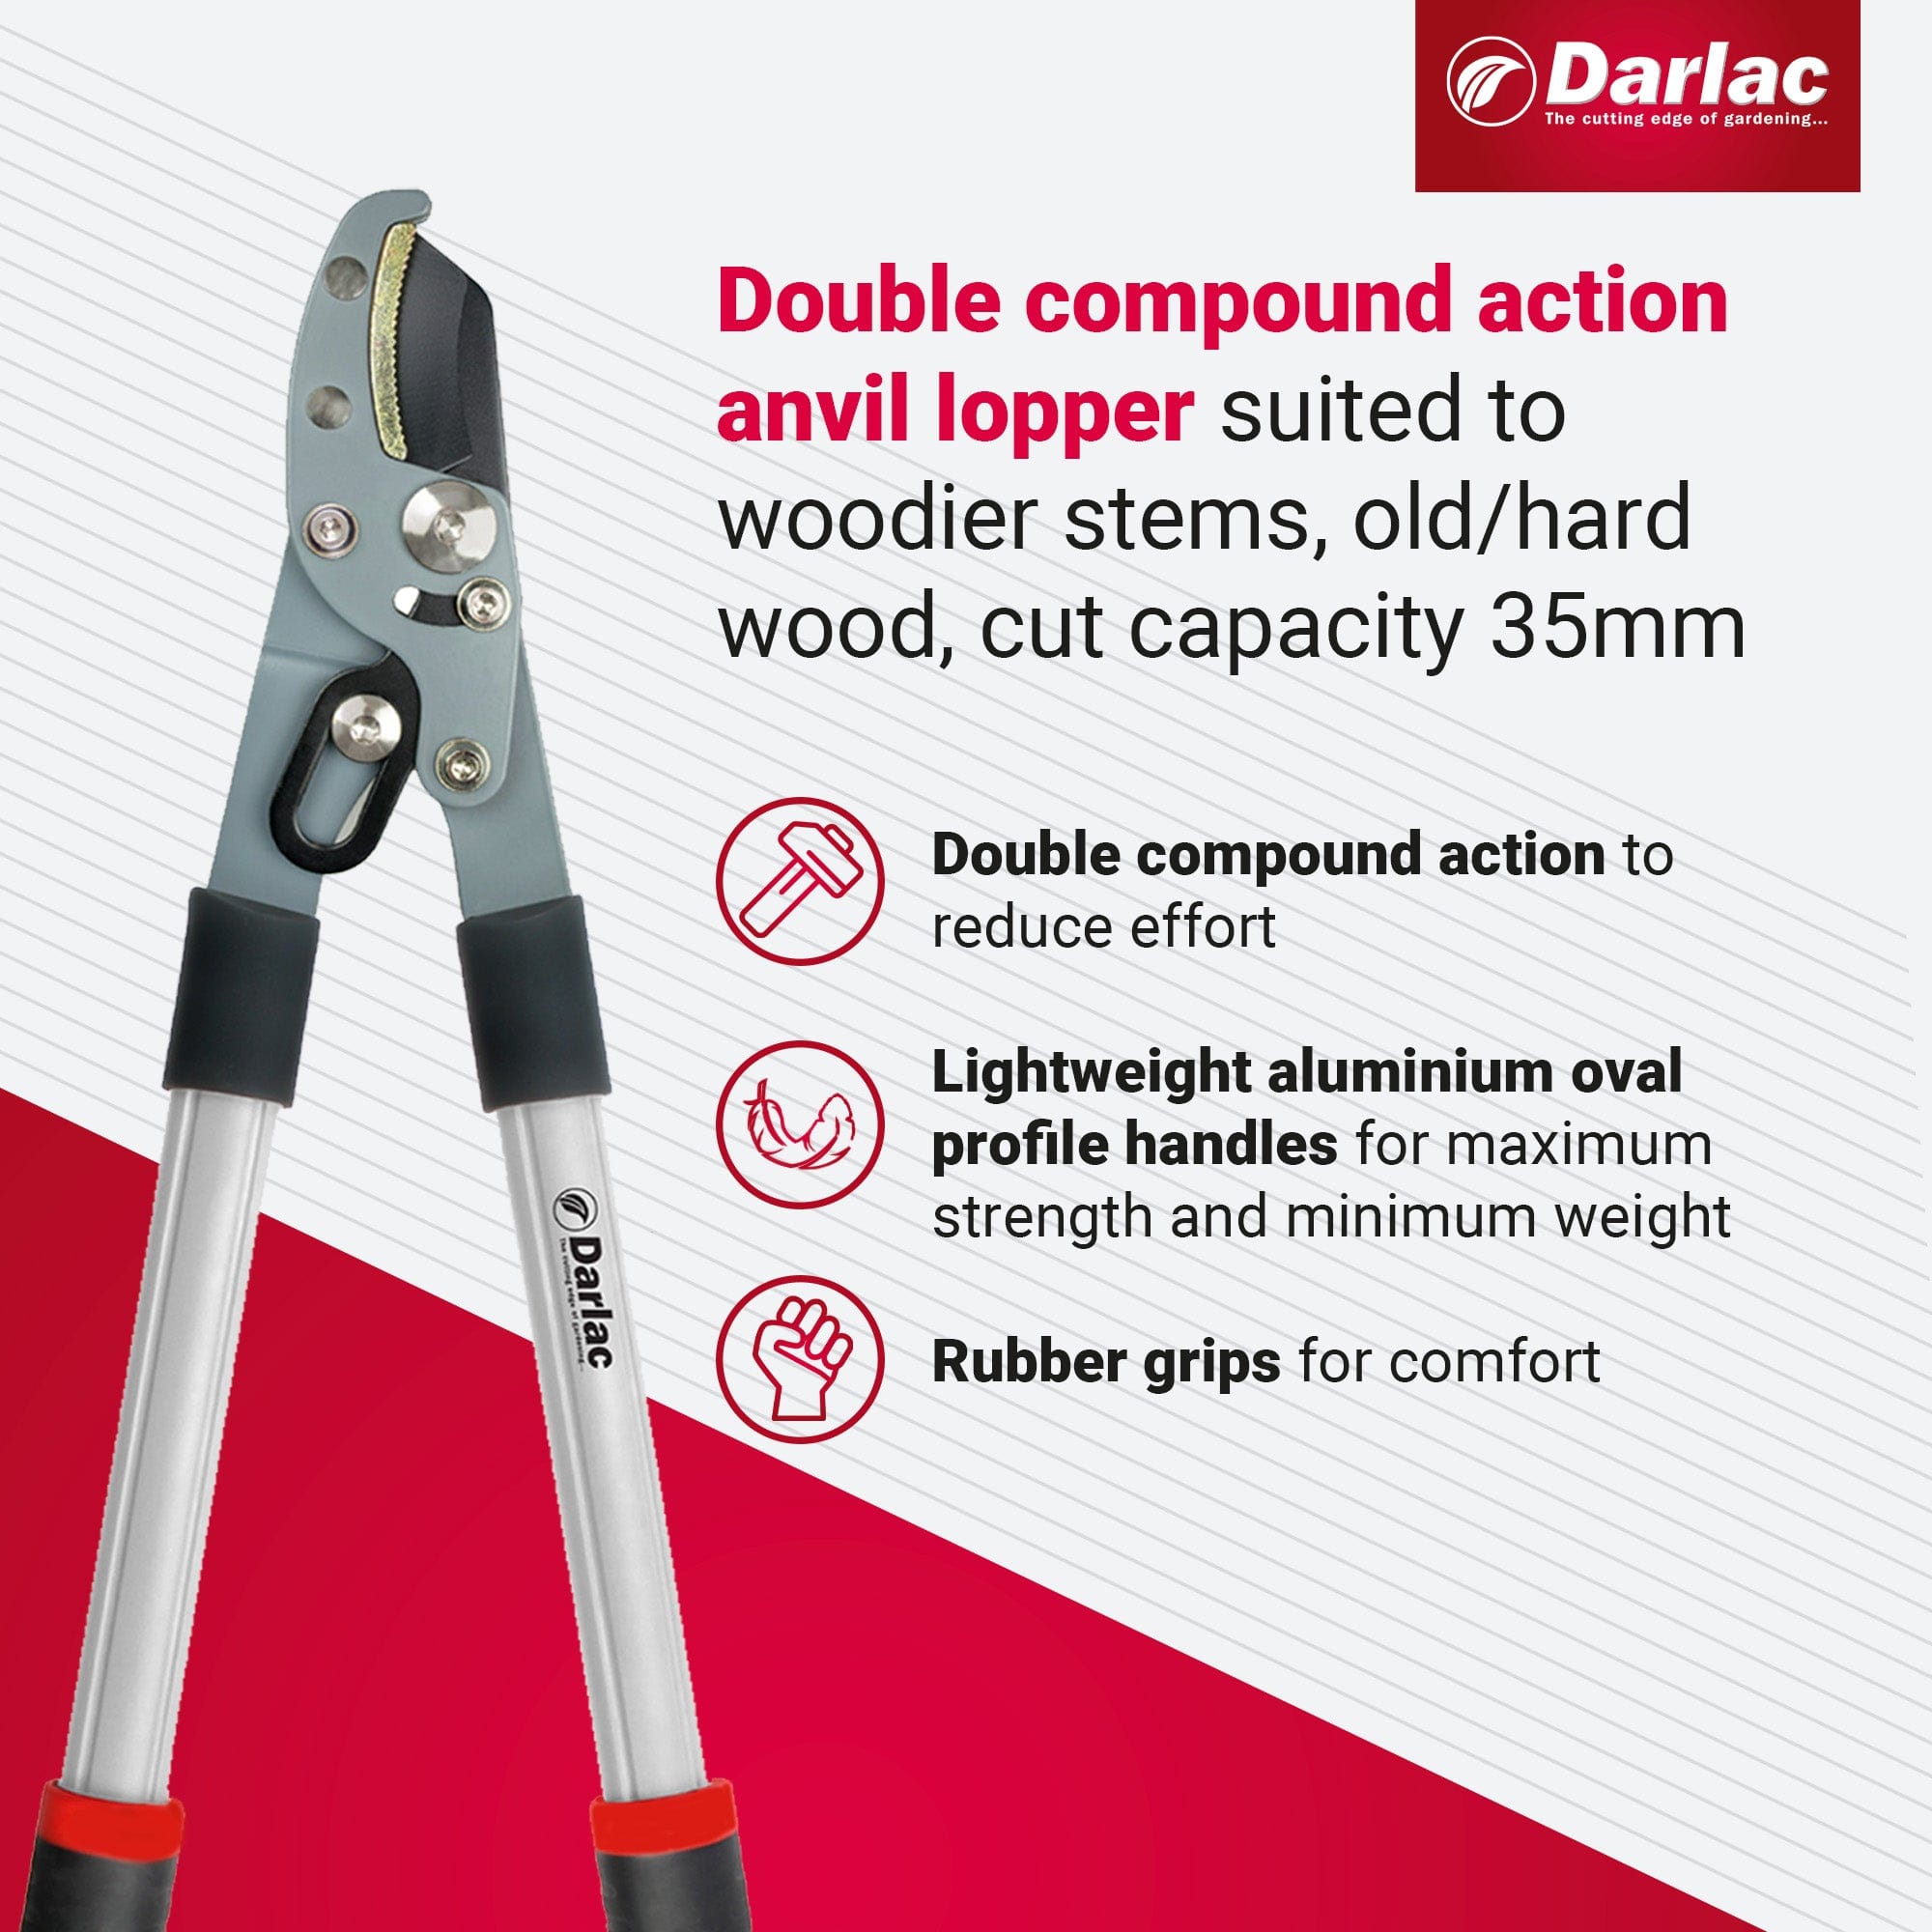 dt-brown HARDWARE Darlac Compact Compound Action Anvil Lopper